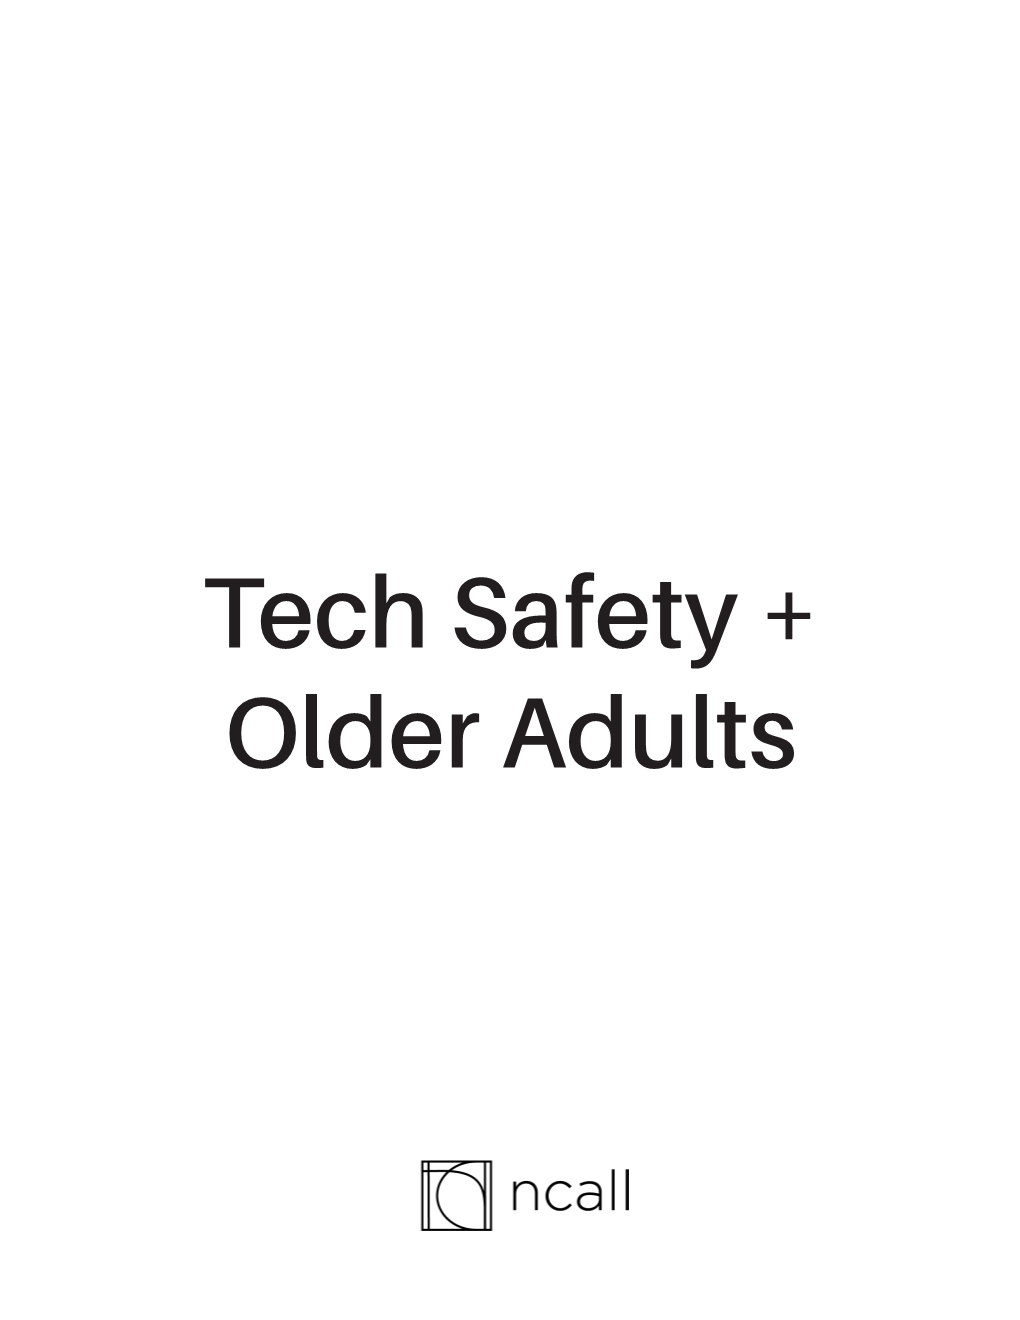 Tech Safety + Older Adults Toolkit